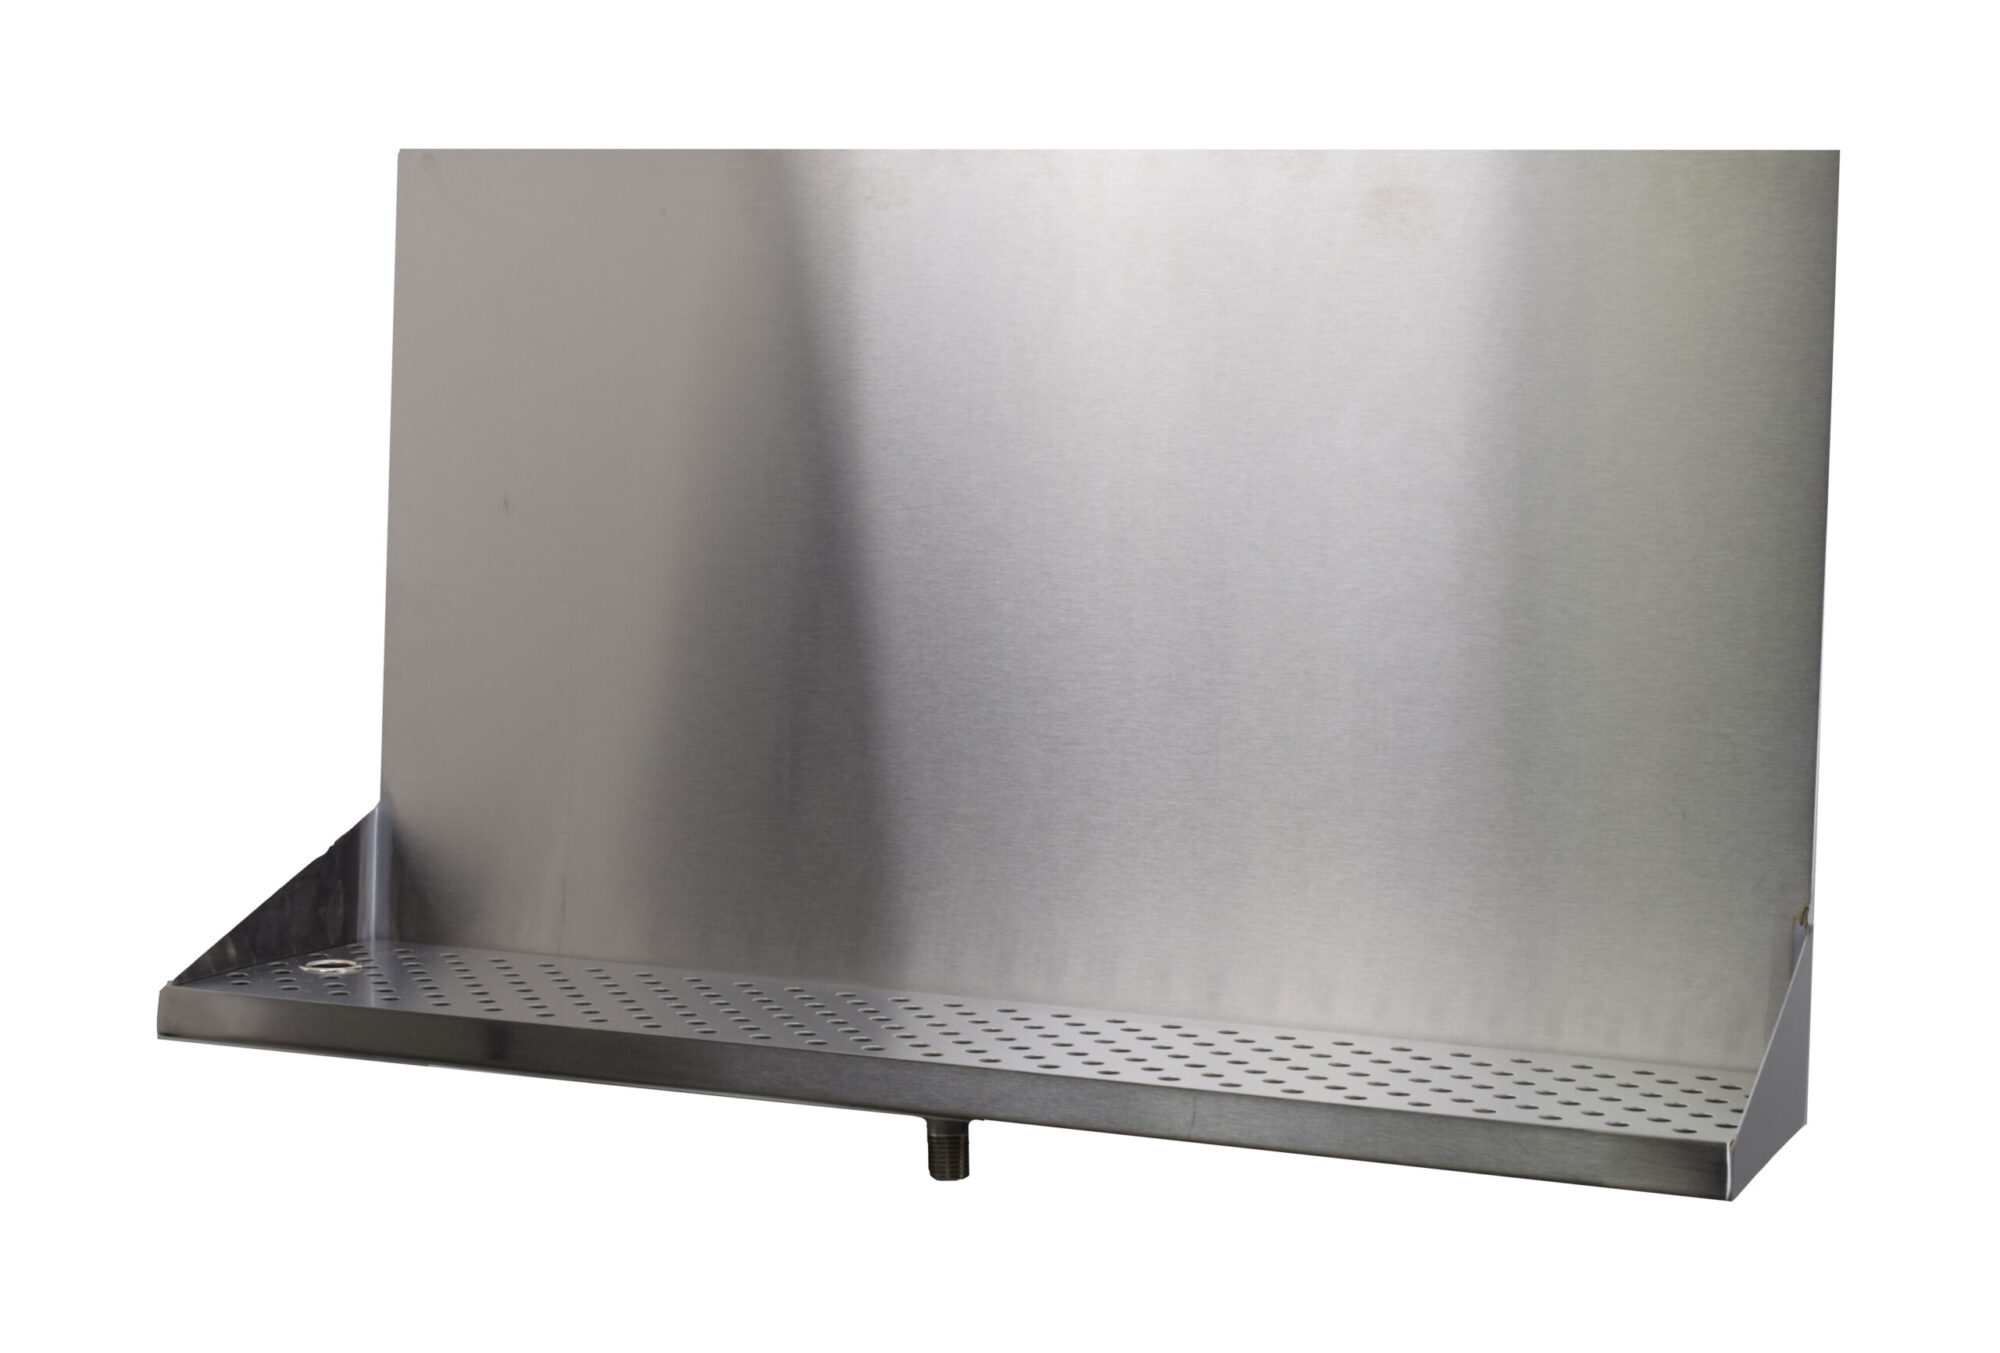 518-360T Stainless Steel Wall Mount Tray with 1/2" NPT Welded Drain - 36"L x 8"W x 18"H - No Holes